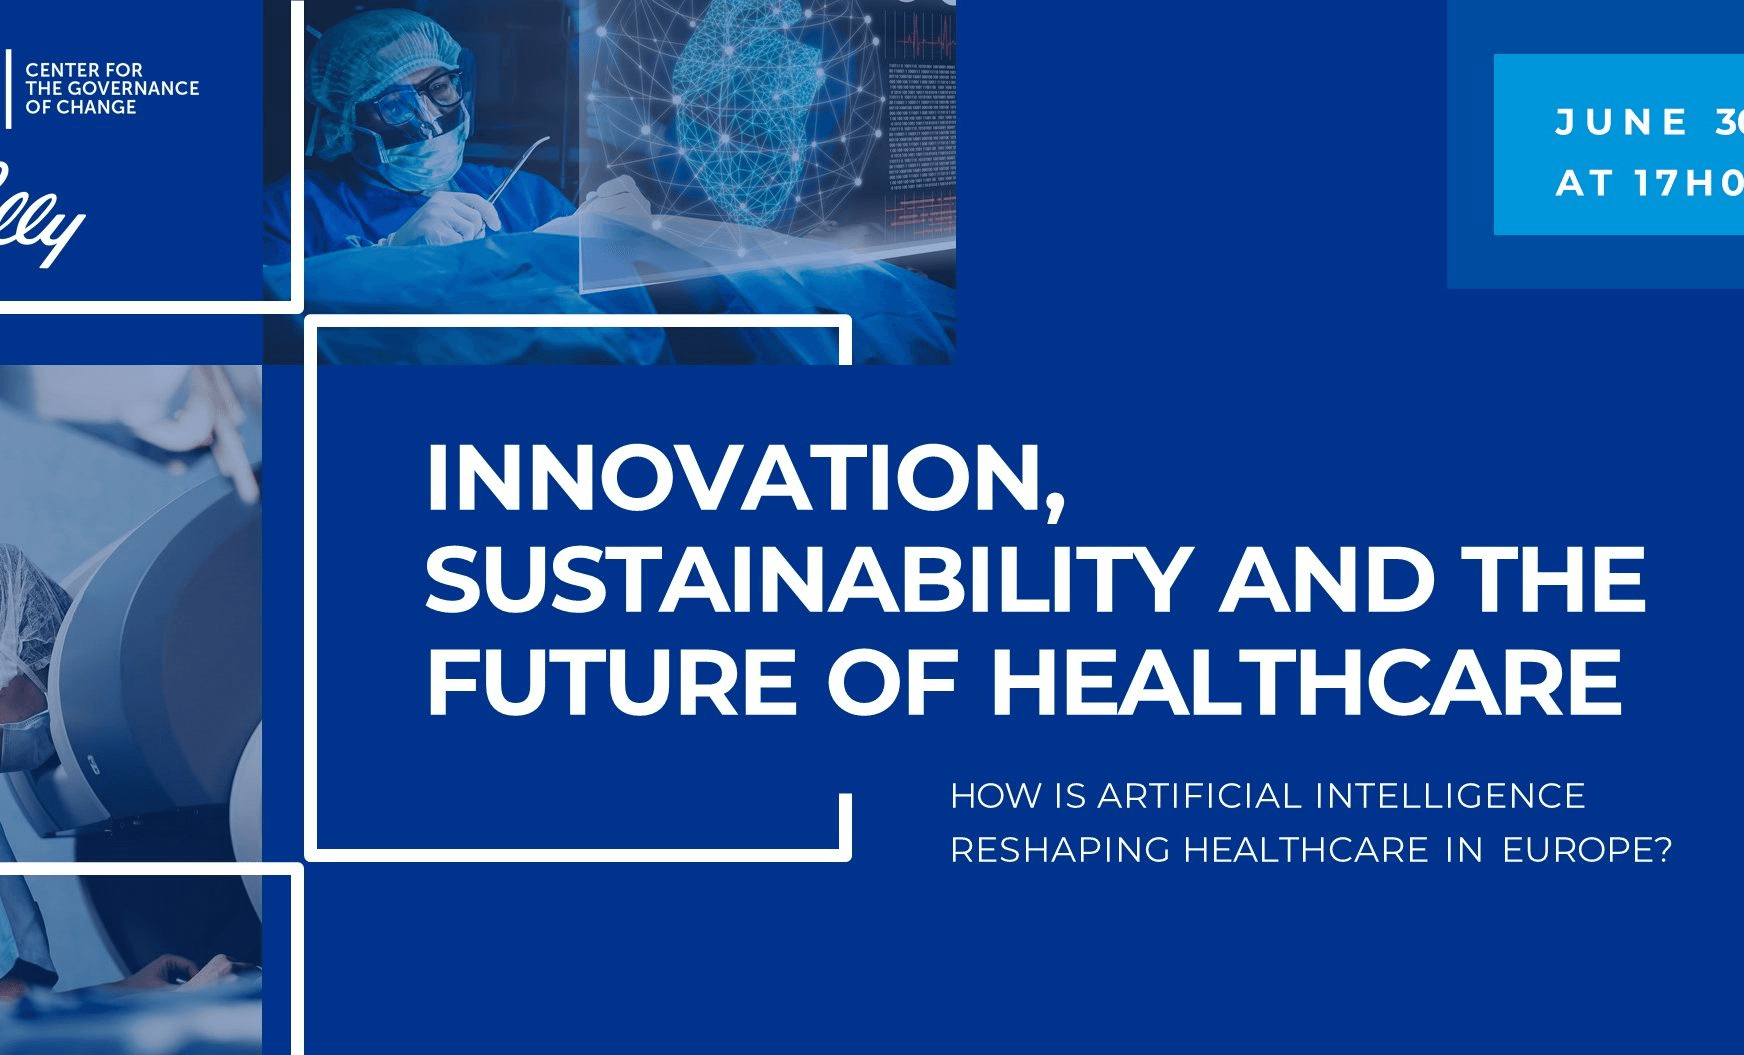 Image Innovation, Sustainability and the Future of Healthcare